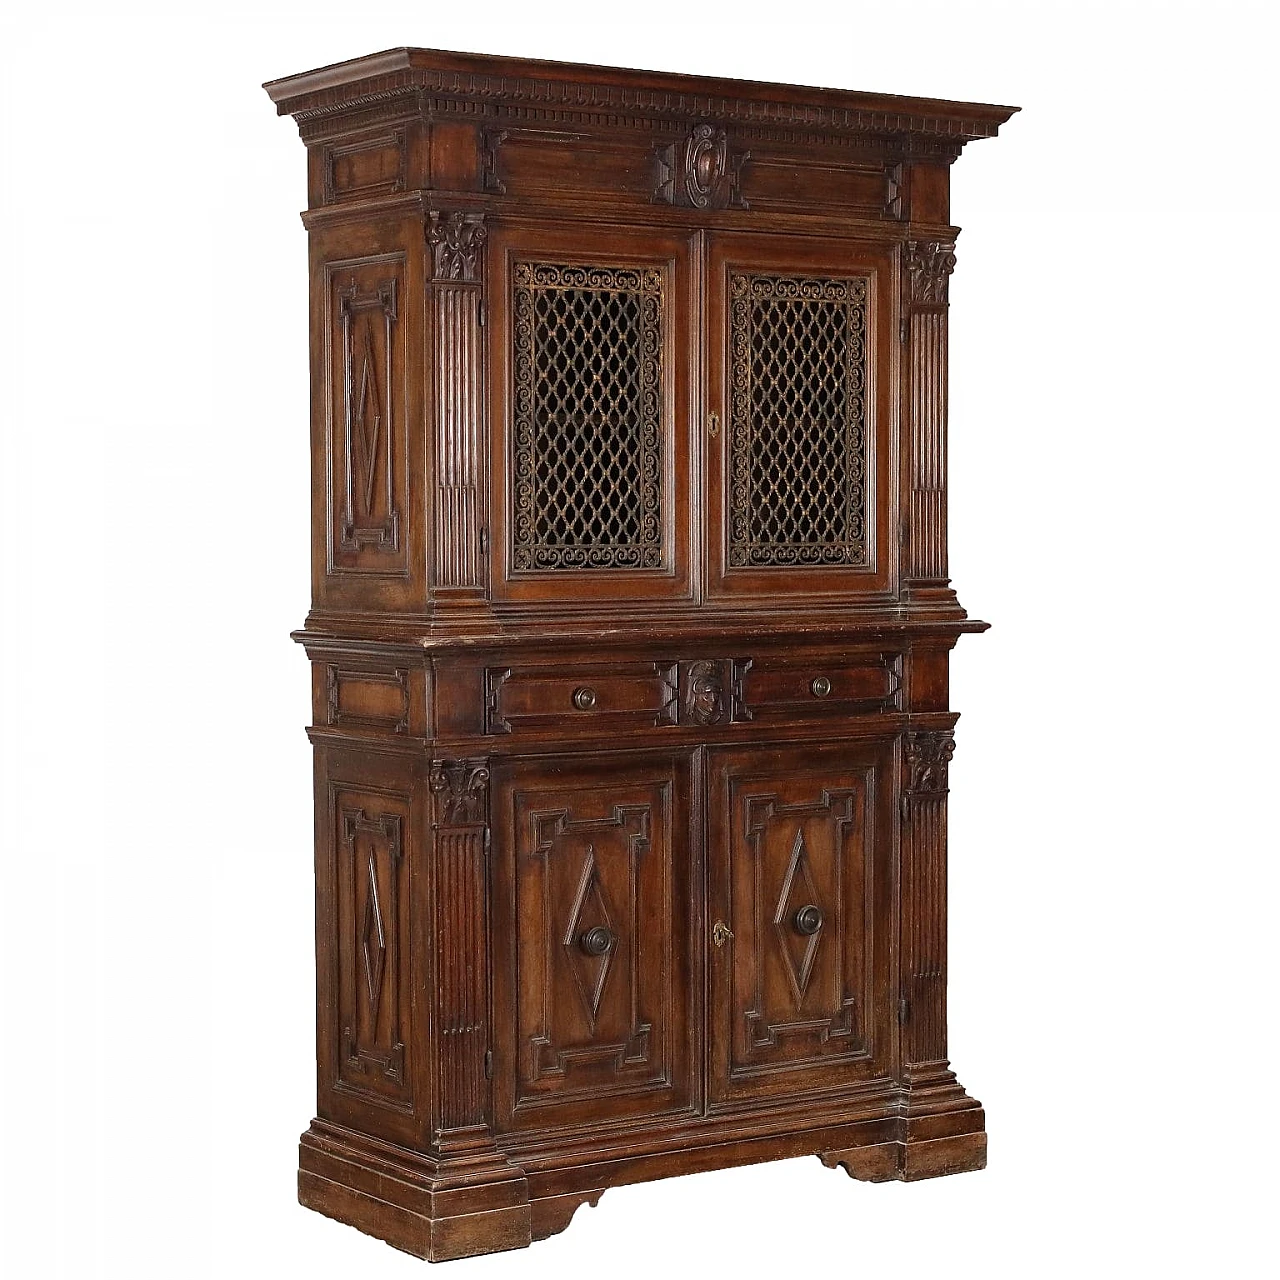 Double-body sideboard made of carved spruce and iron grating 1